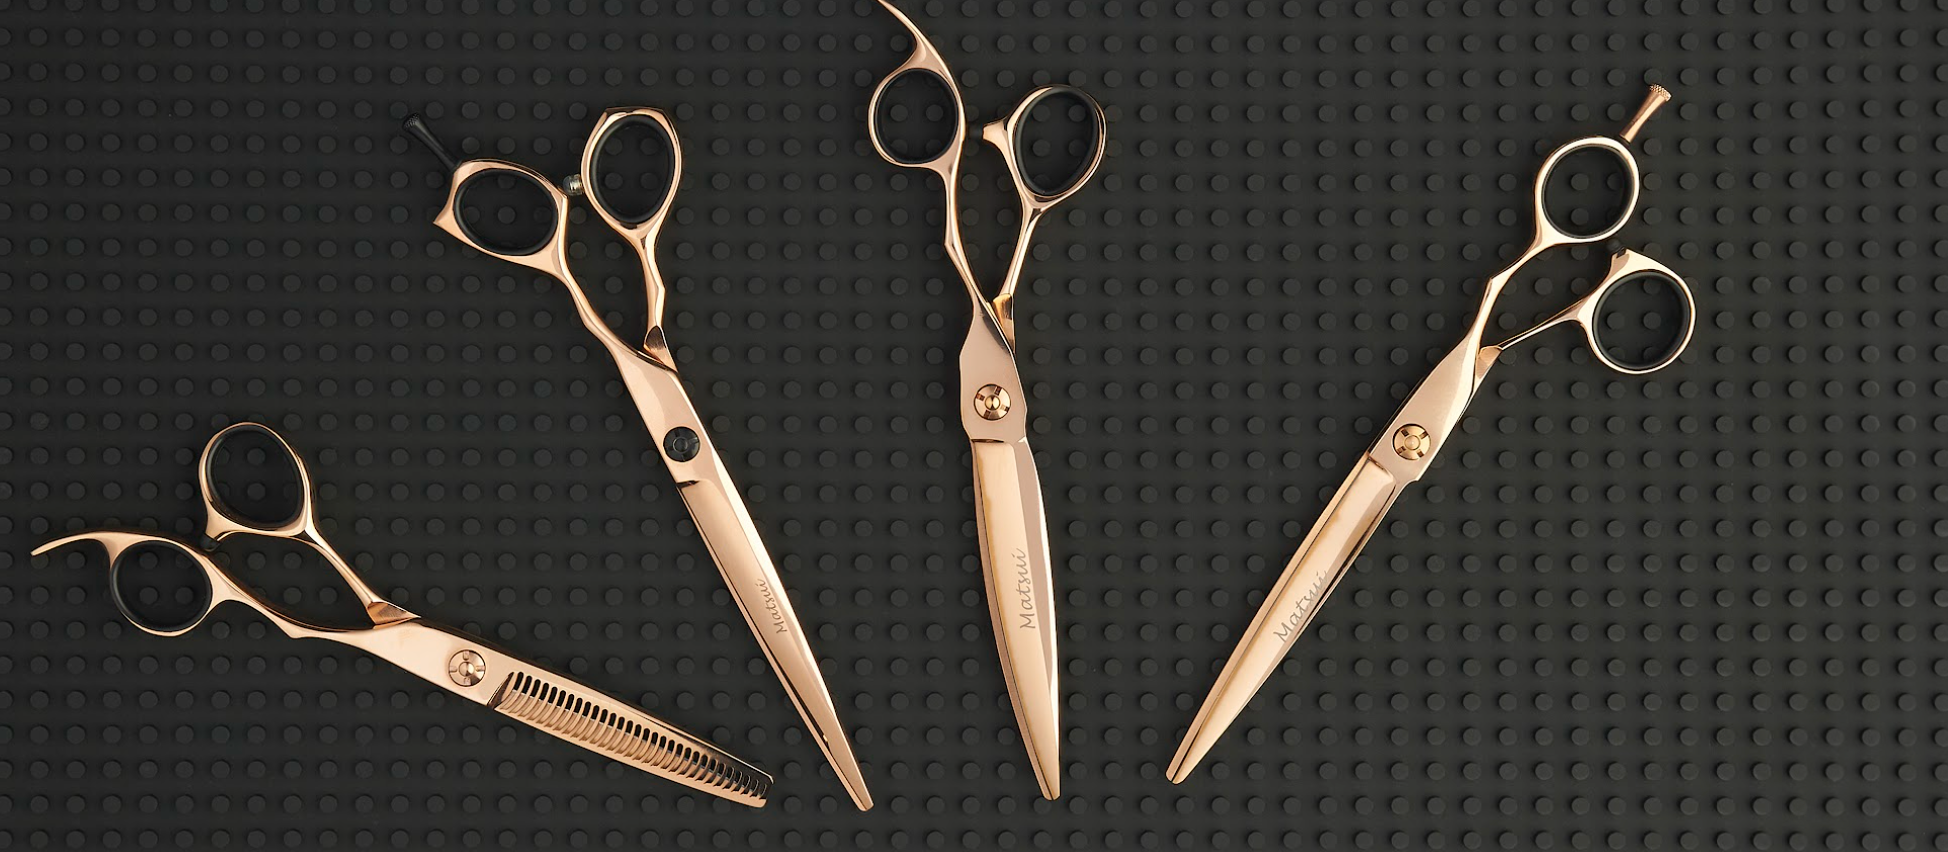 Who makes the best hair scissors in the world